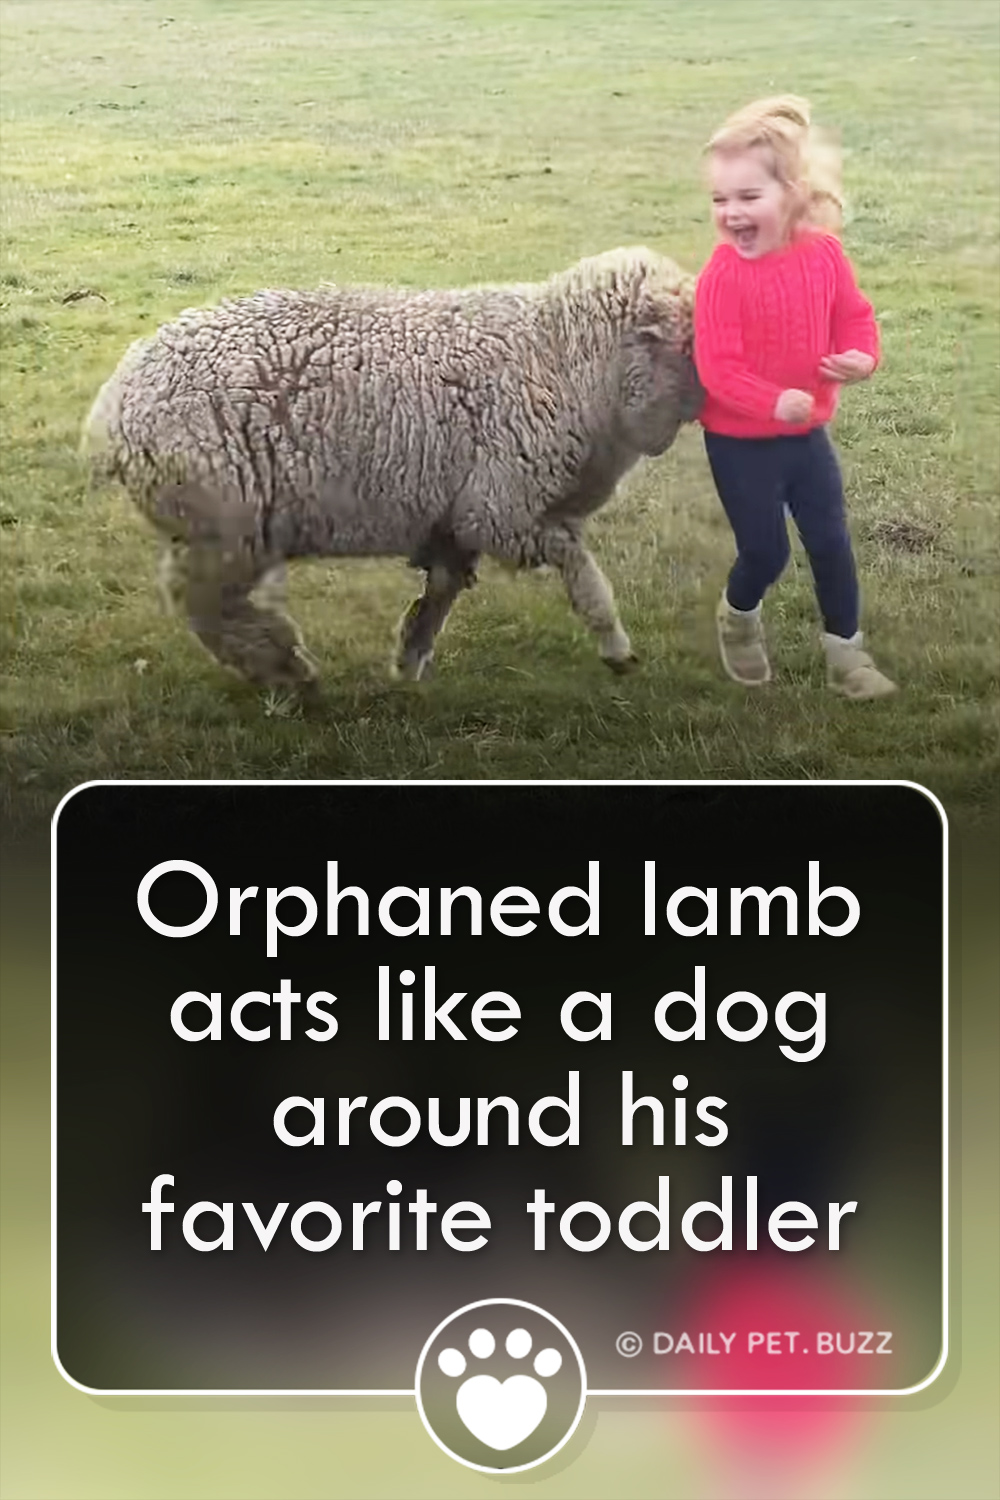 Orphaned lamb acts like a dog around his favorite toddler